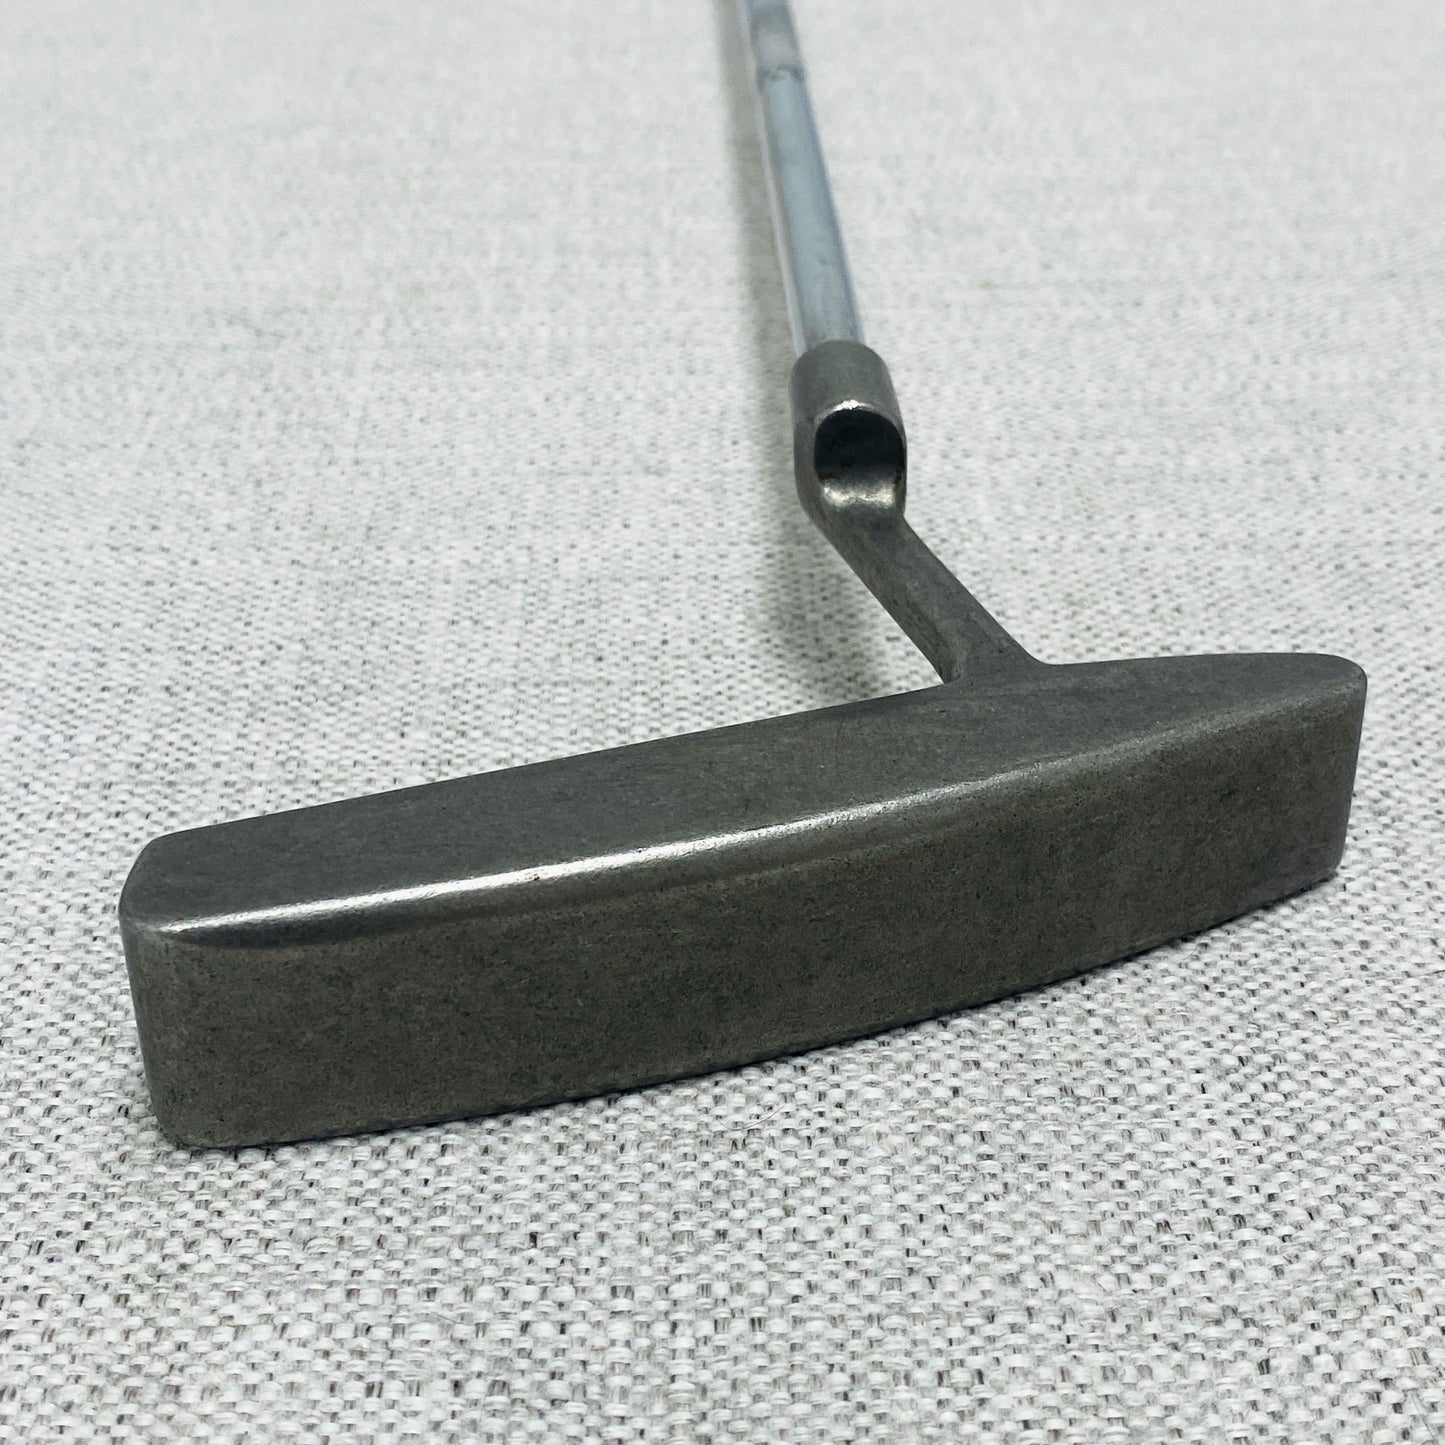 PING Pal 4 Stainless Putter. 35 inch - Very Good Condition # T996